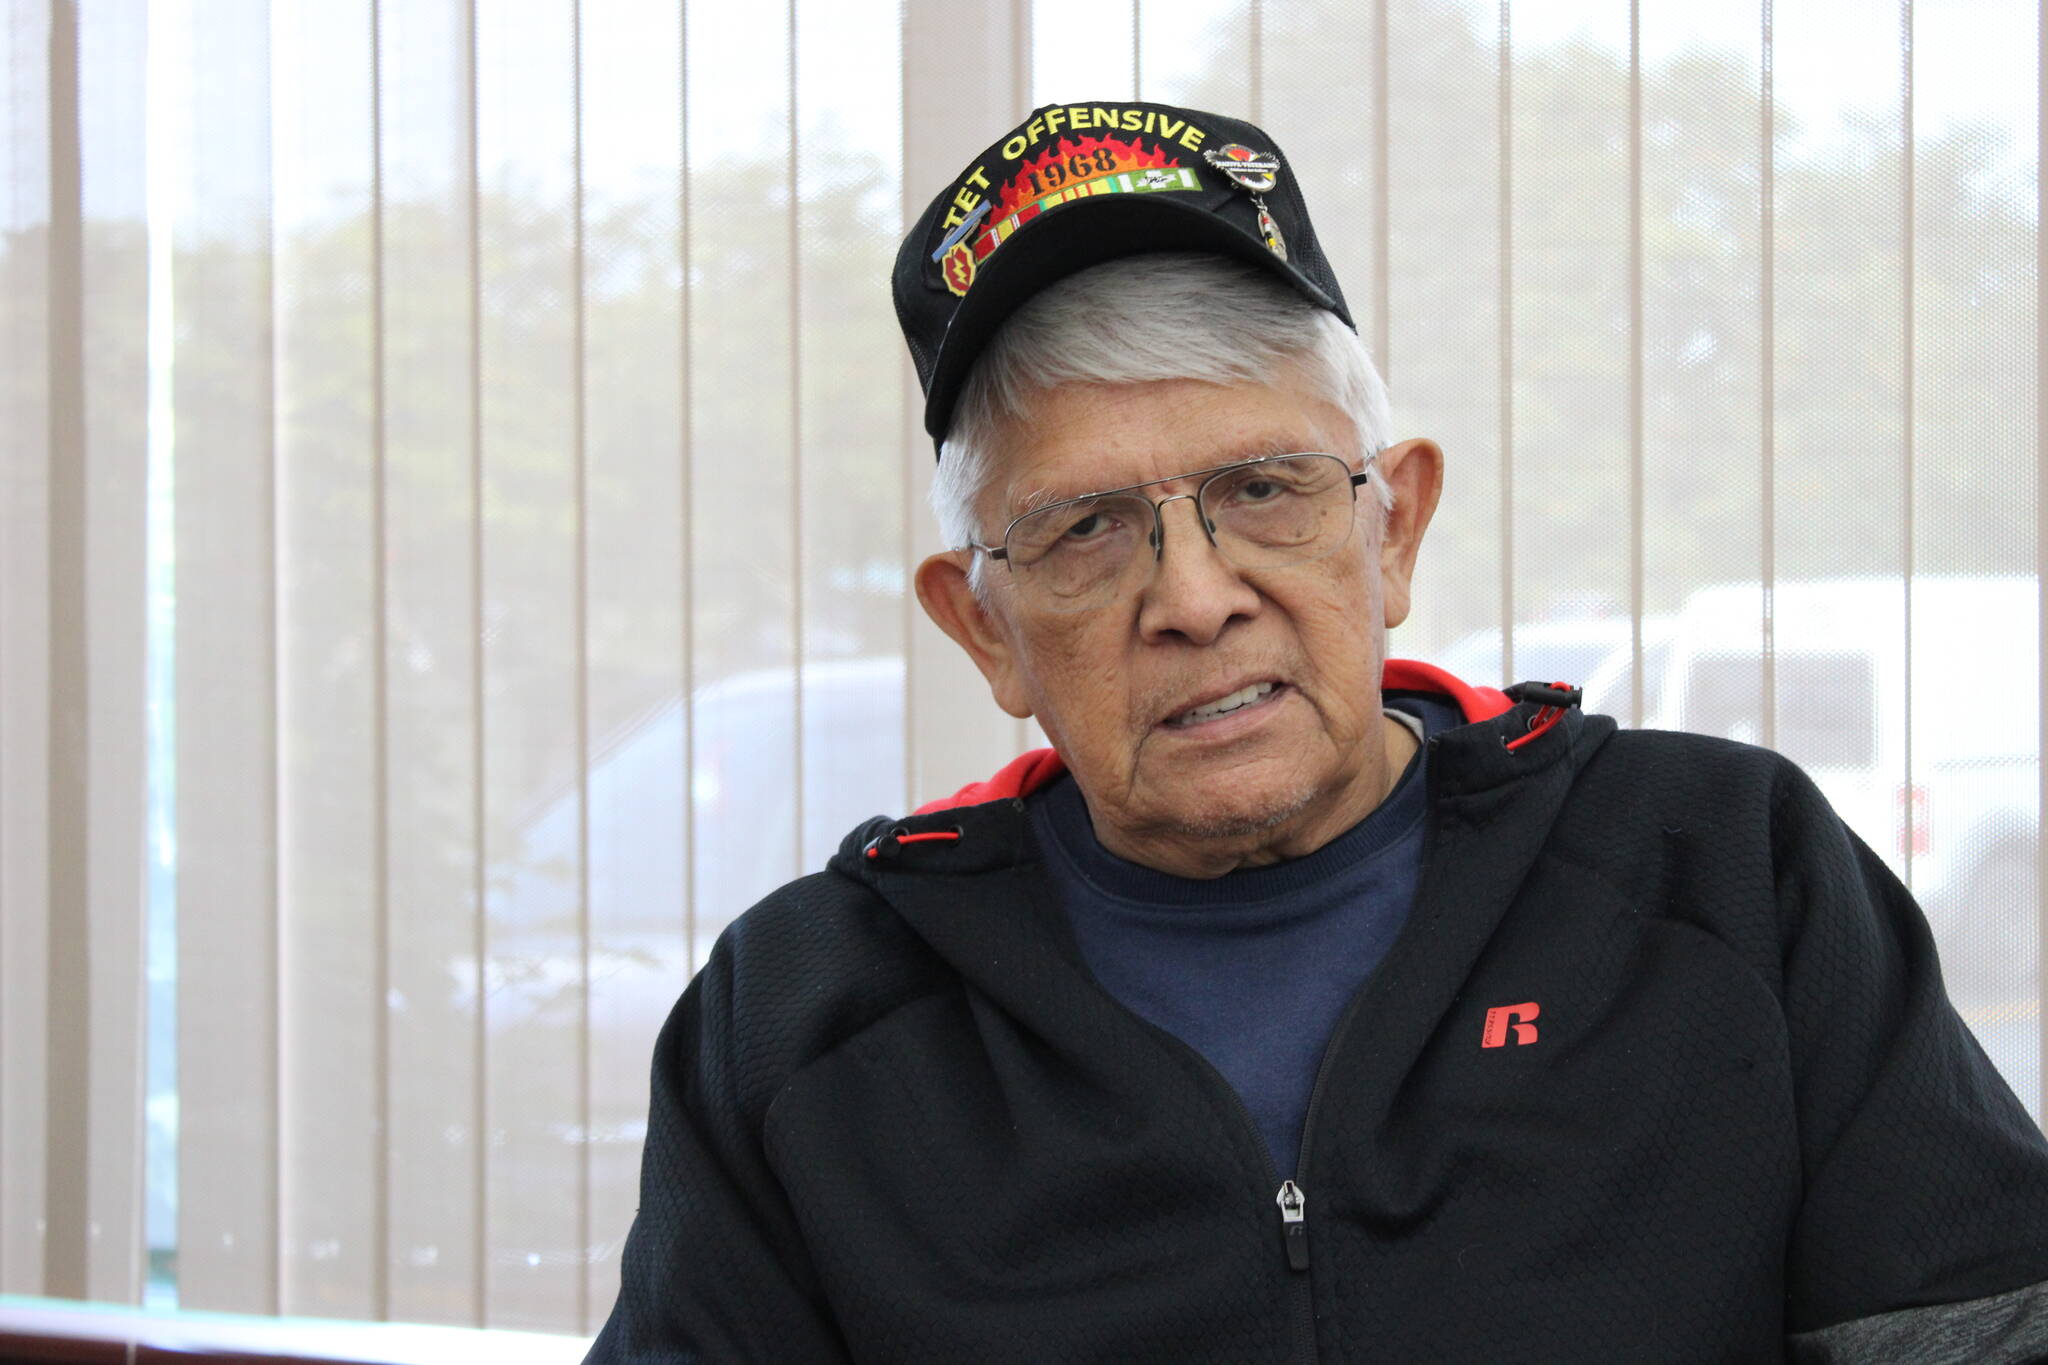 George J. Bennett Sr. is one of hundreds of Alaska Native Vietnam veterans eligible to apply for a land allotment in Alaska under the John D. Dingell Jr. Conservation, Management, and Recreation Act. Many other veterans are now deceased or have not applied for their allotment. (Peter Segall / Juneau Empire File)